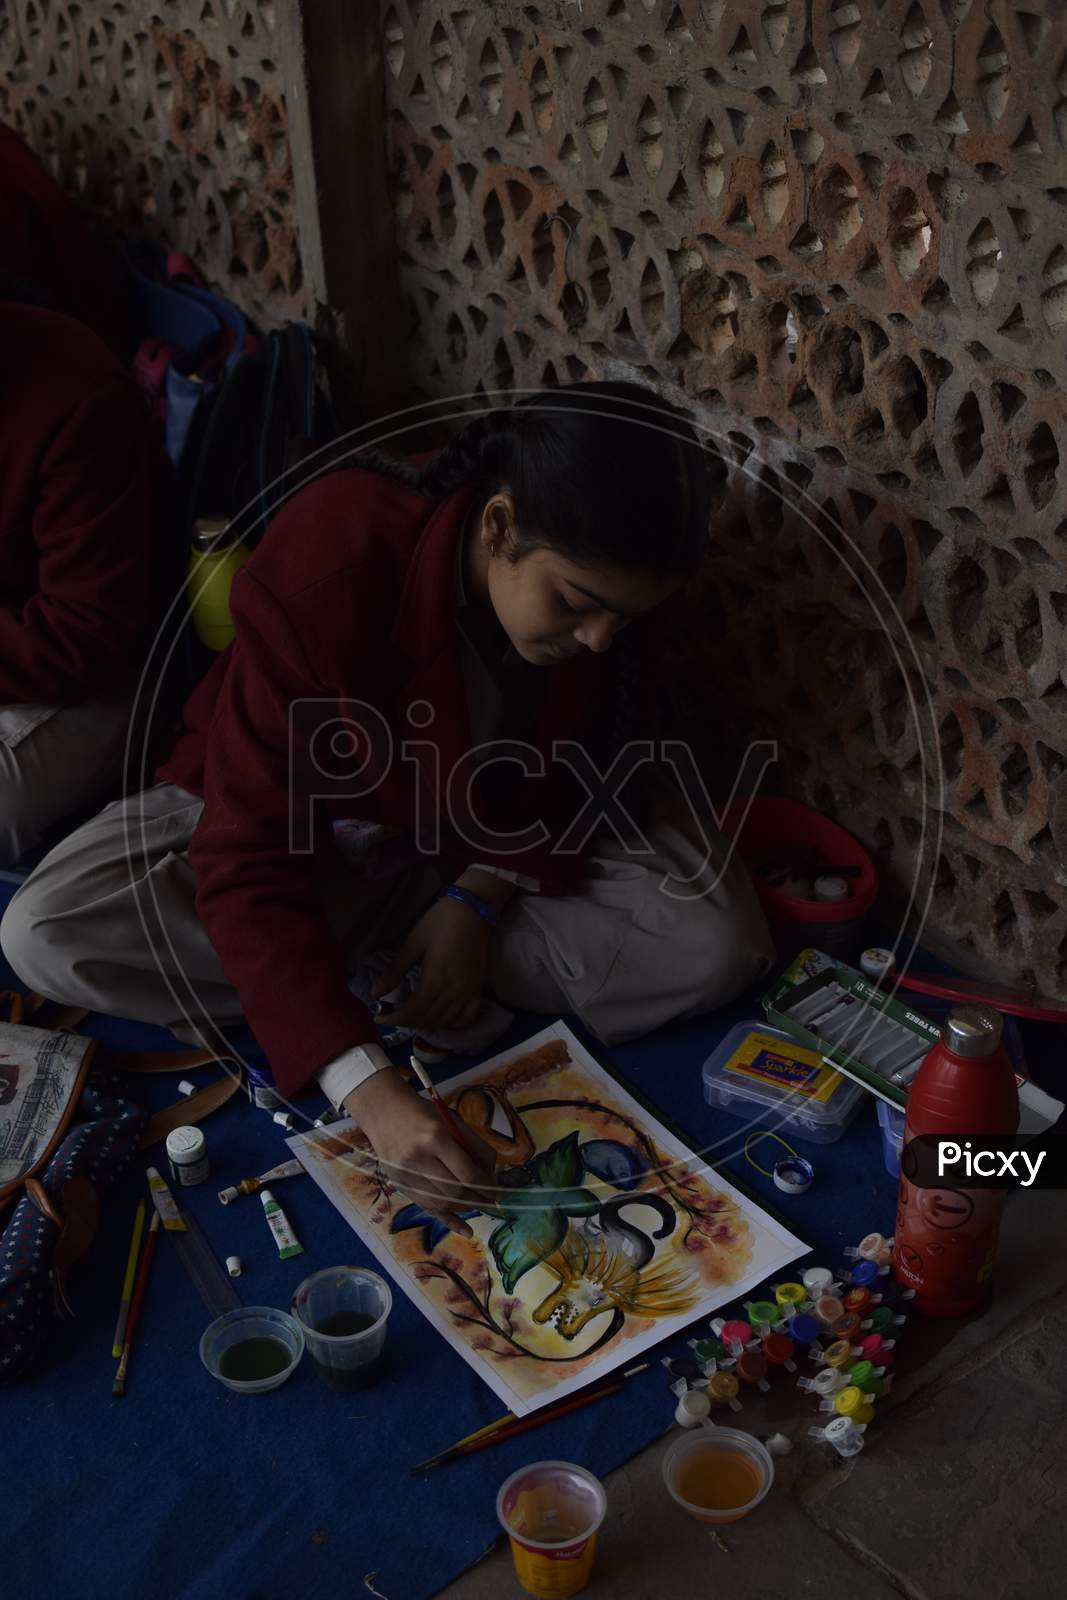 Indian school girl painting during a competition